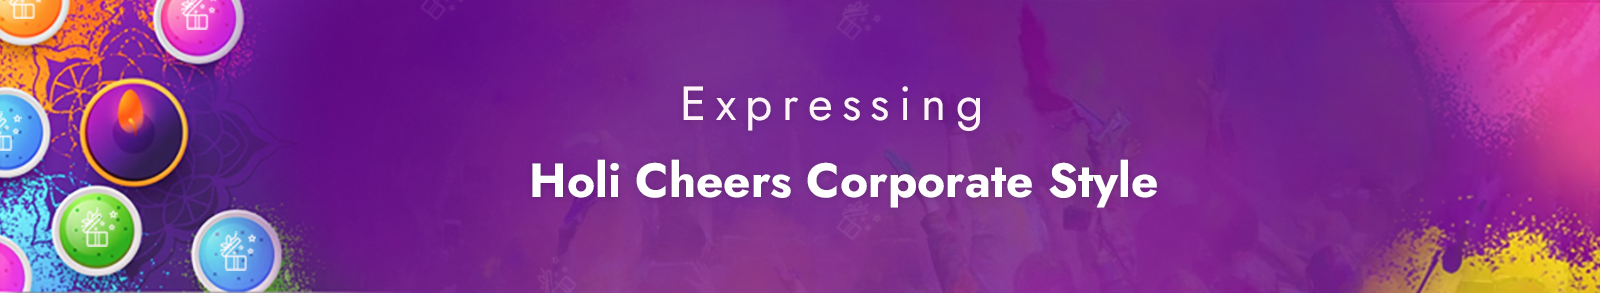 Expressing Holi Cheers, Corporate Style